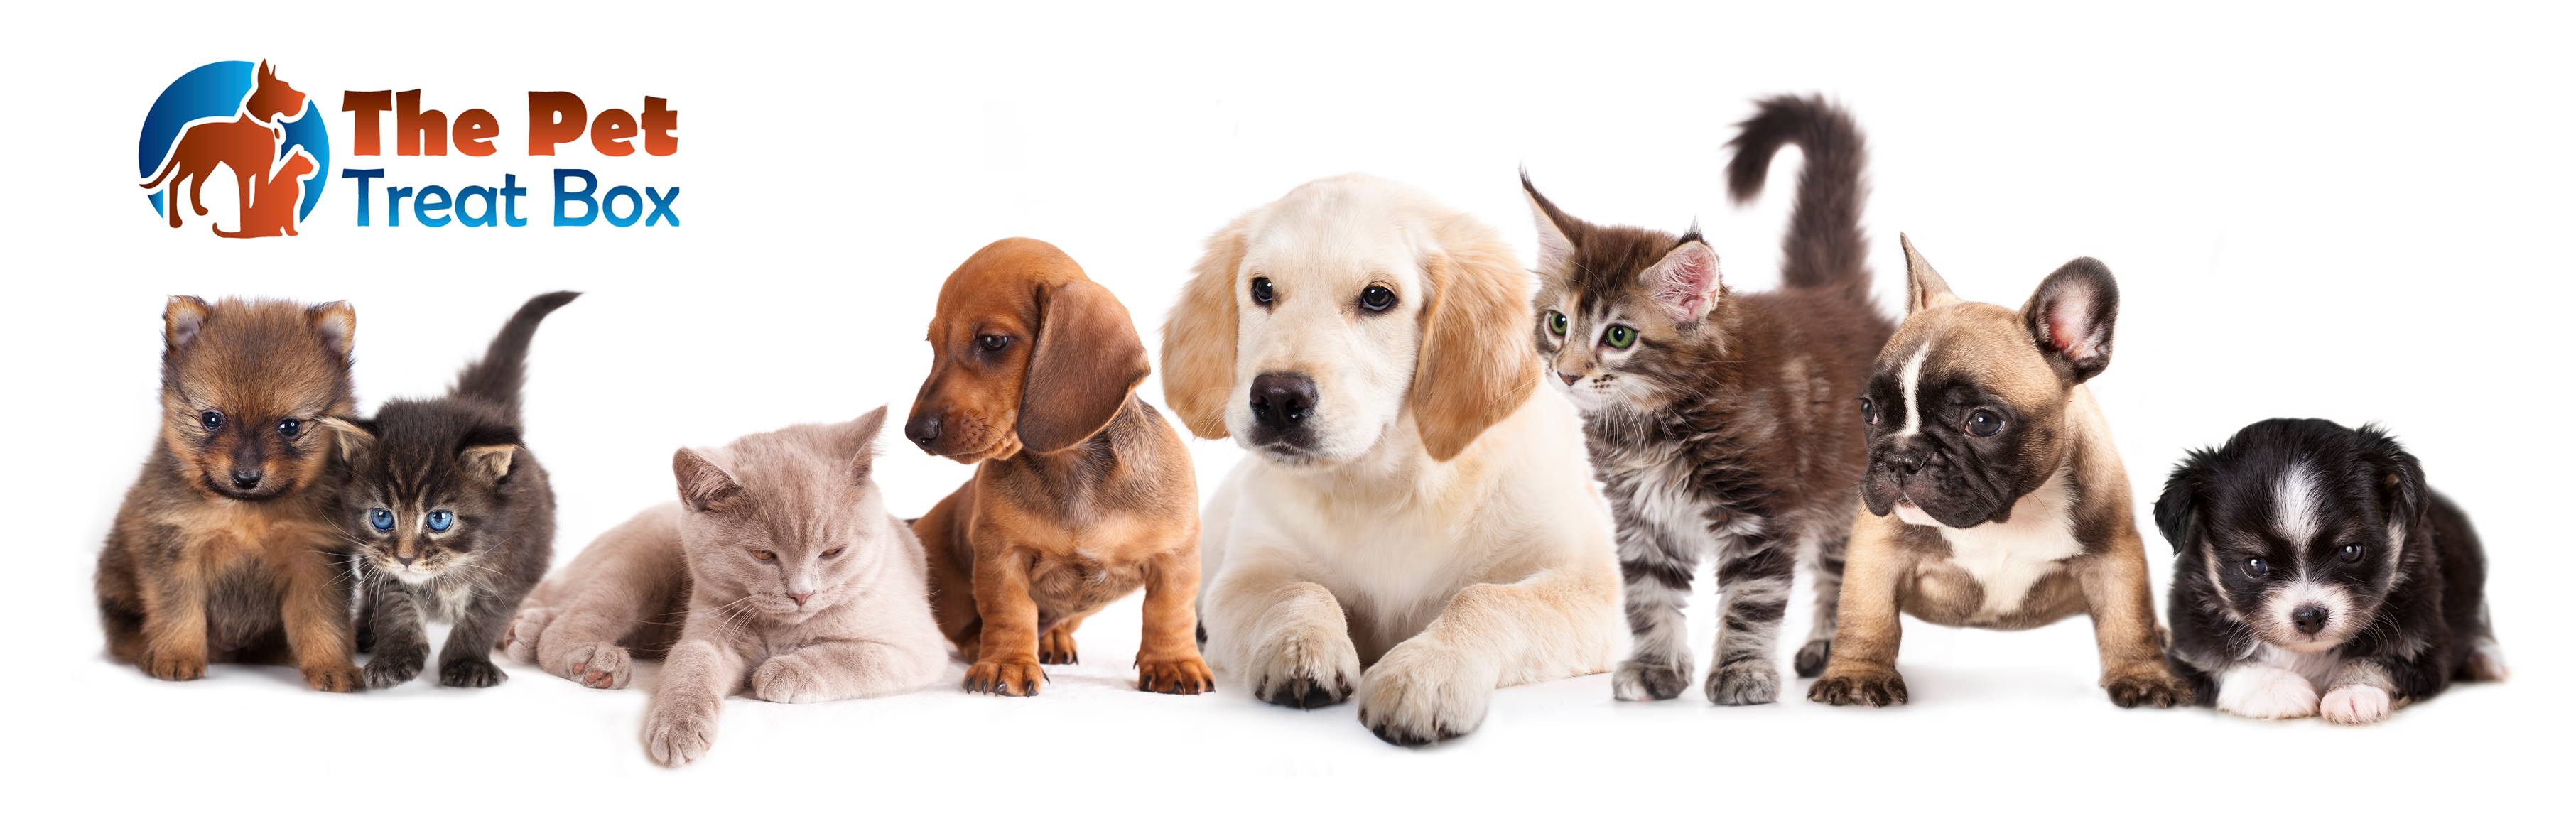 The Pet Treat Box logo with kittens and puppies